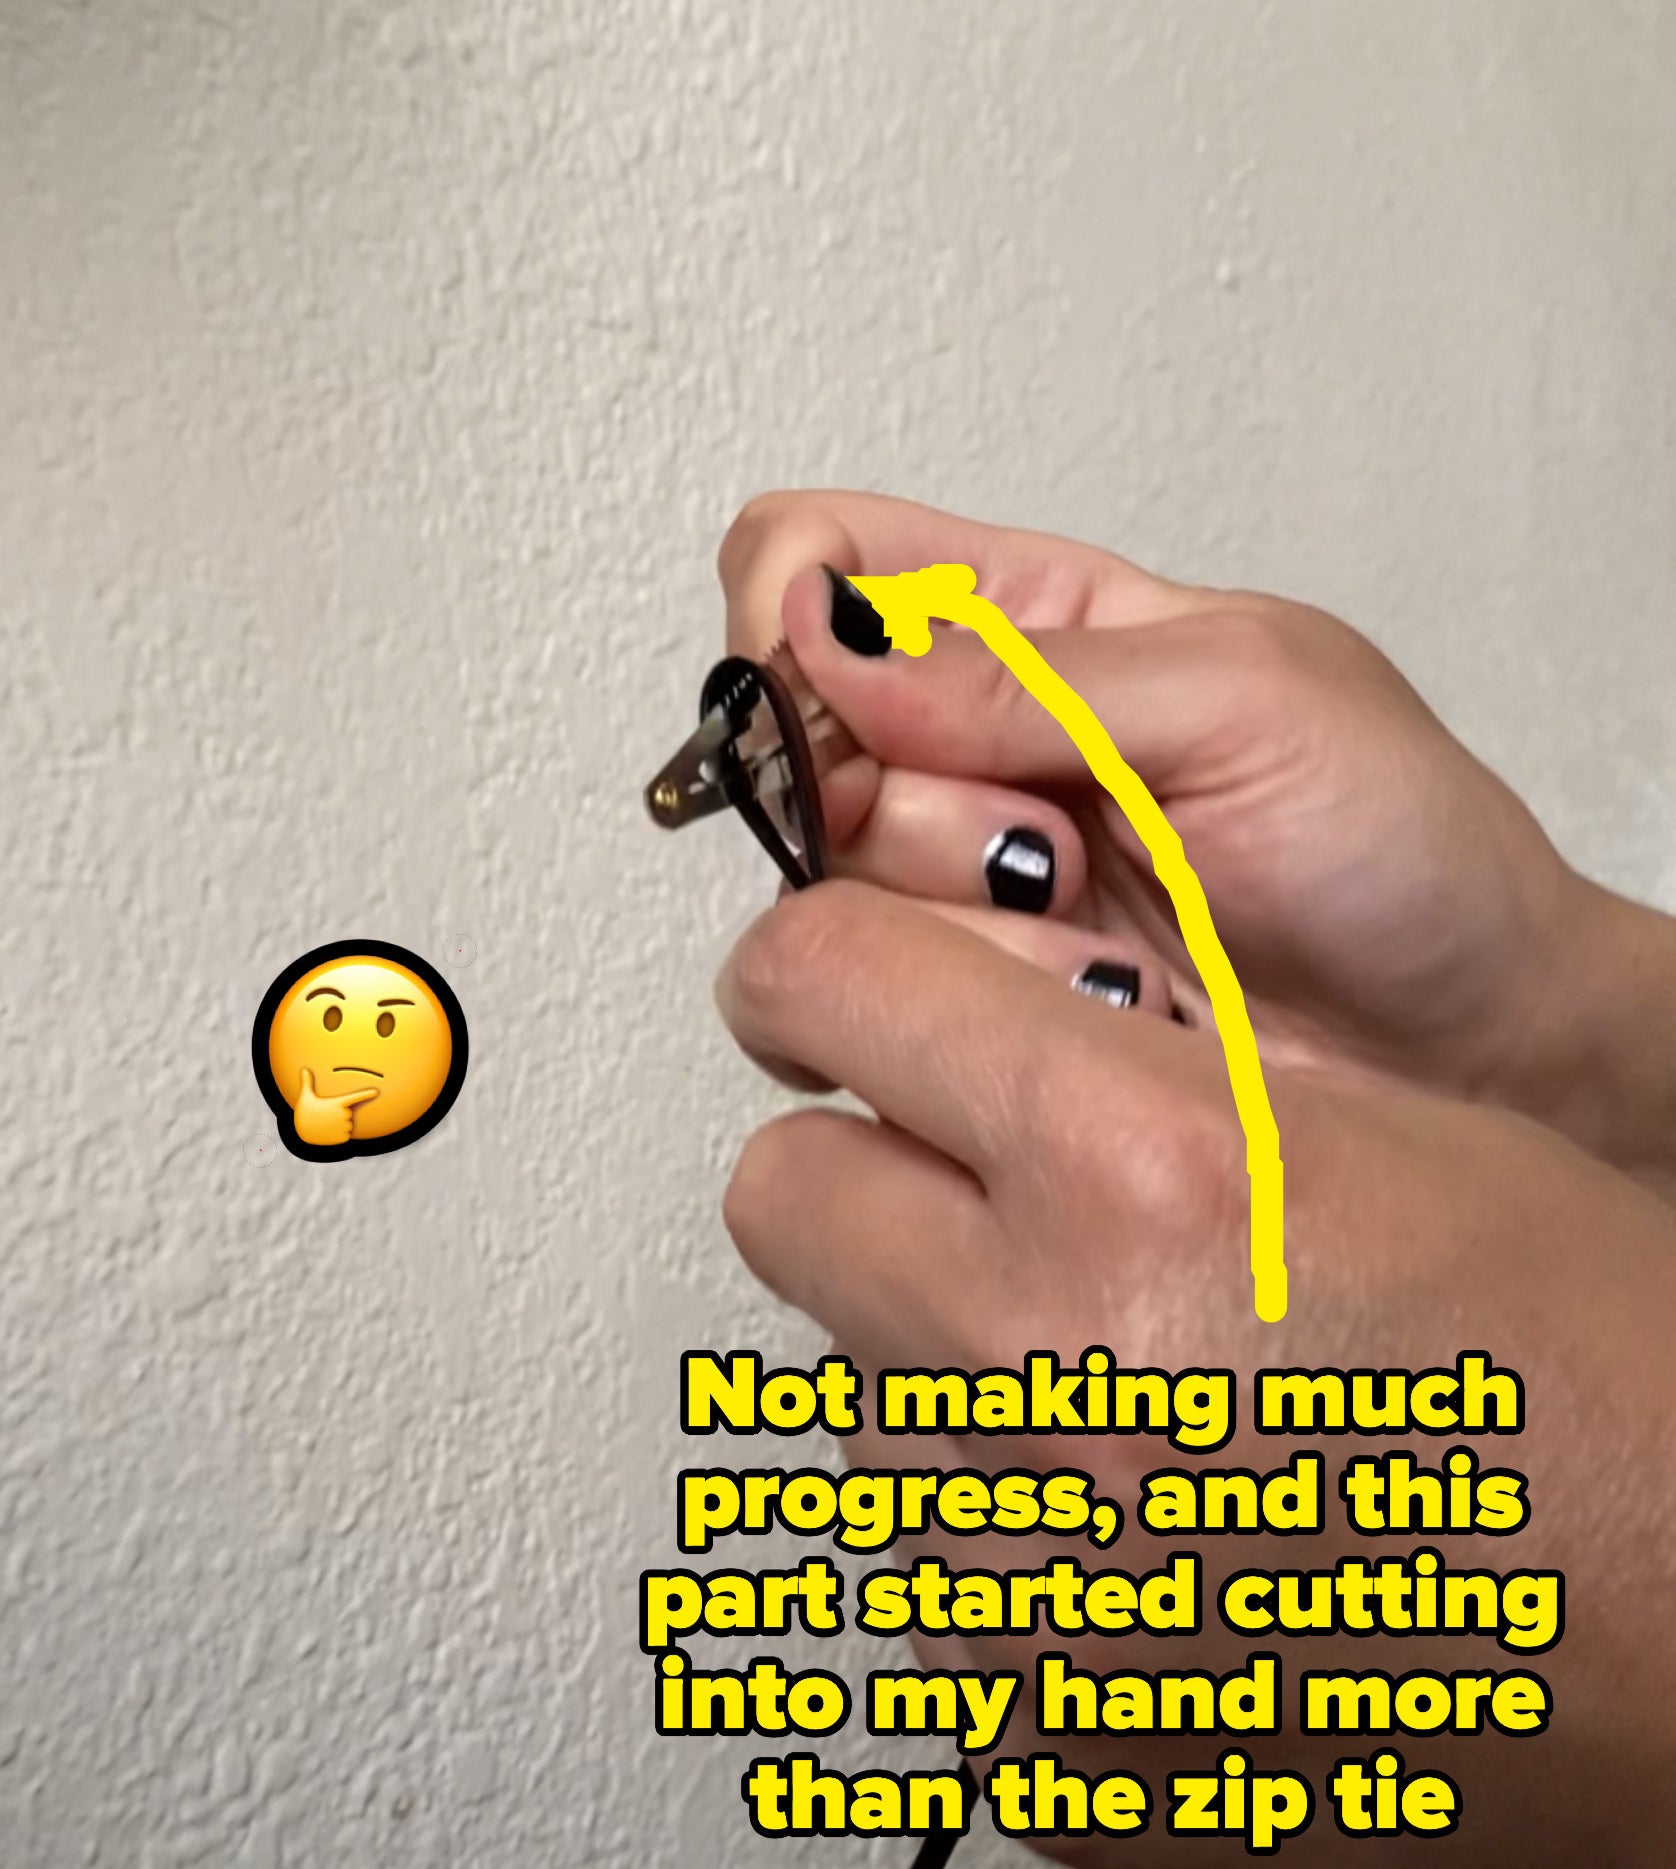 the author bending a zip tie over the edge of the hair clip that has teeth without making much progress in cutting it